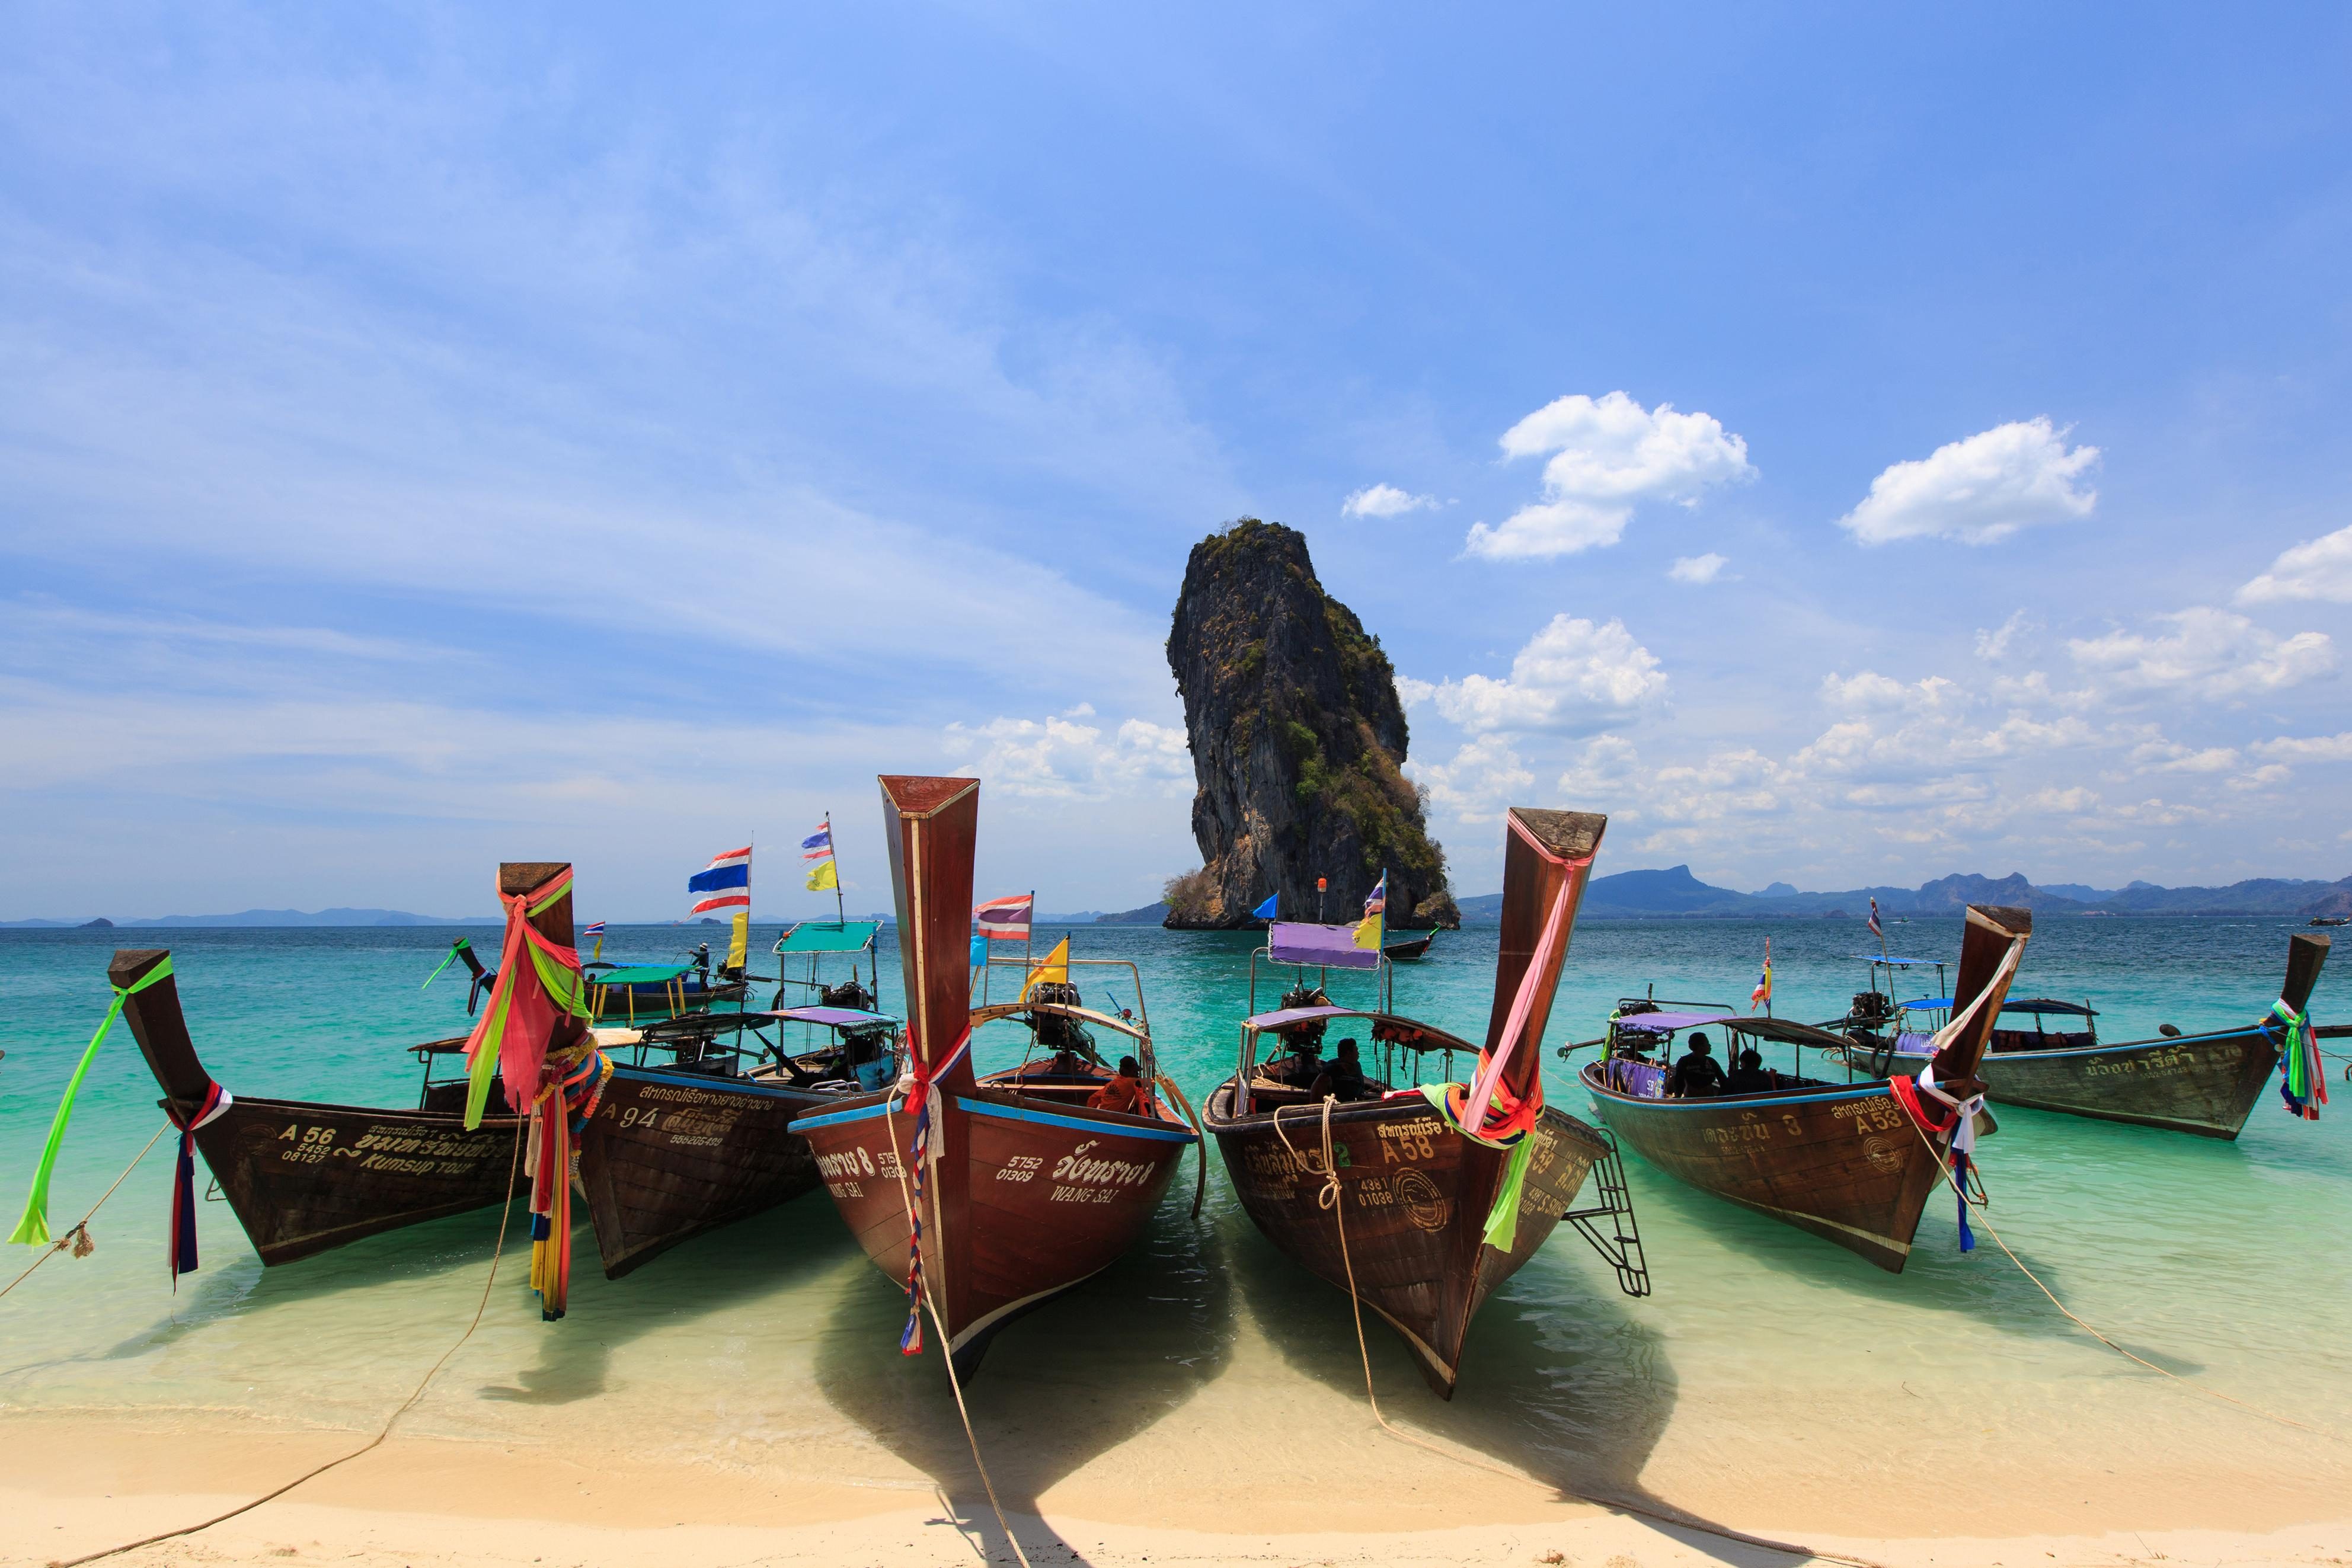 KOH PODA ISLAND. Take a break from the city with a trip to one of Thailand's beaches. Photo courtesy of the Tourism Authority of Thailand 